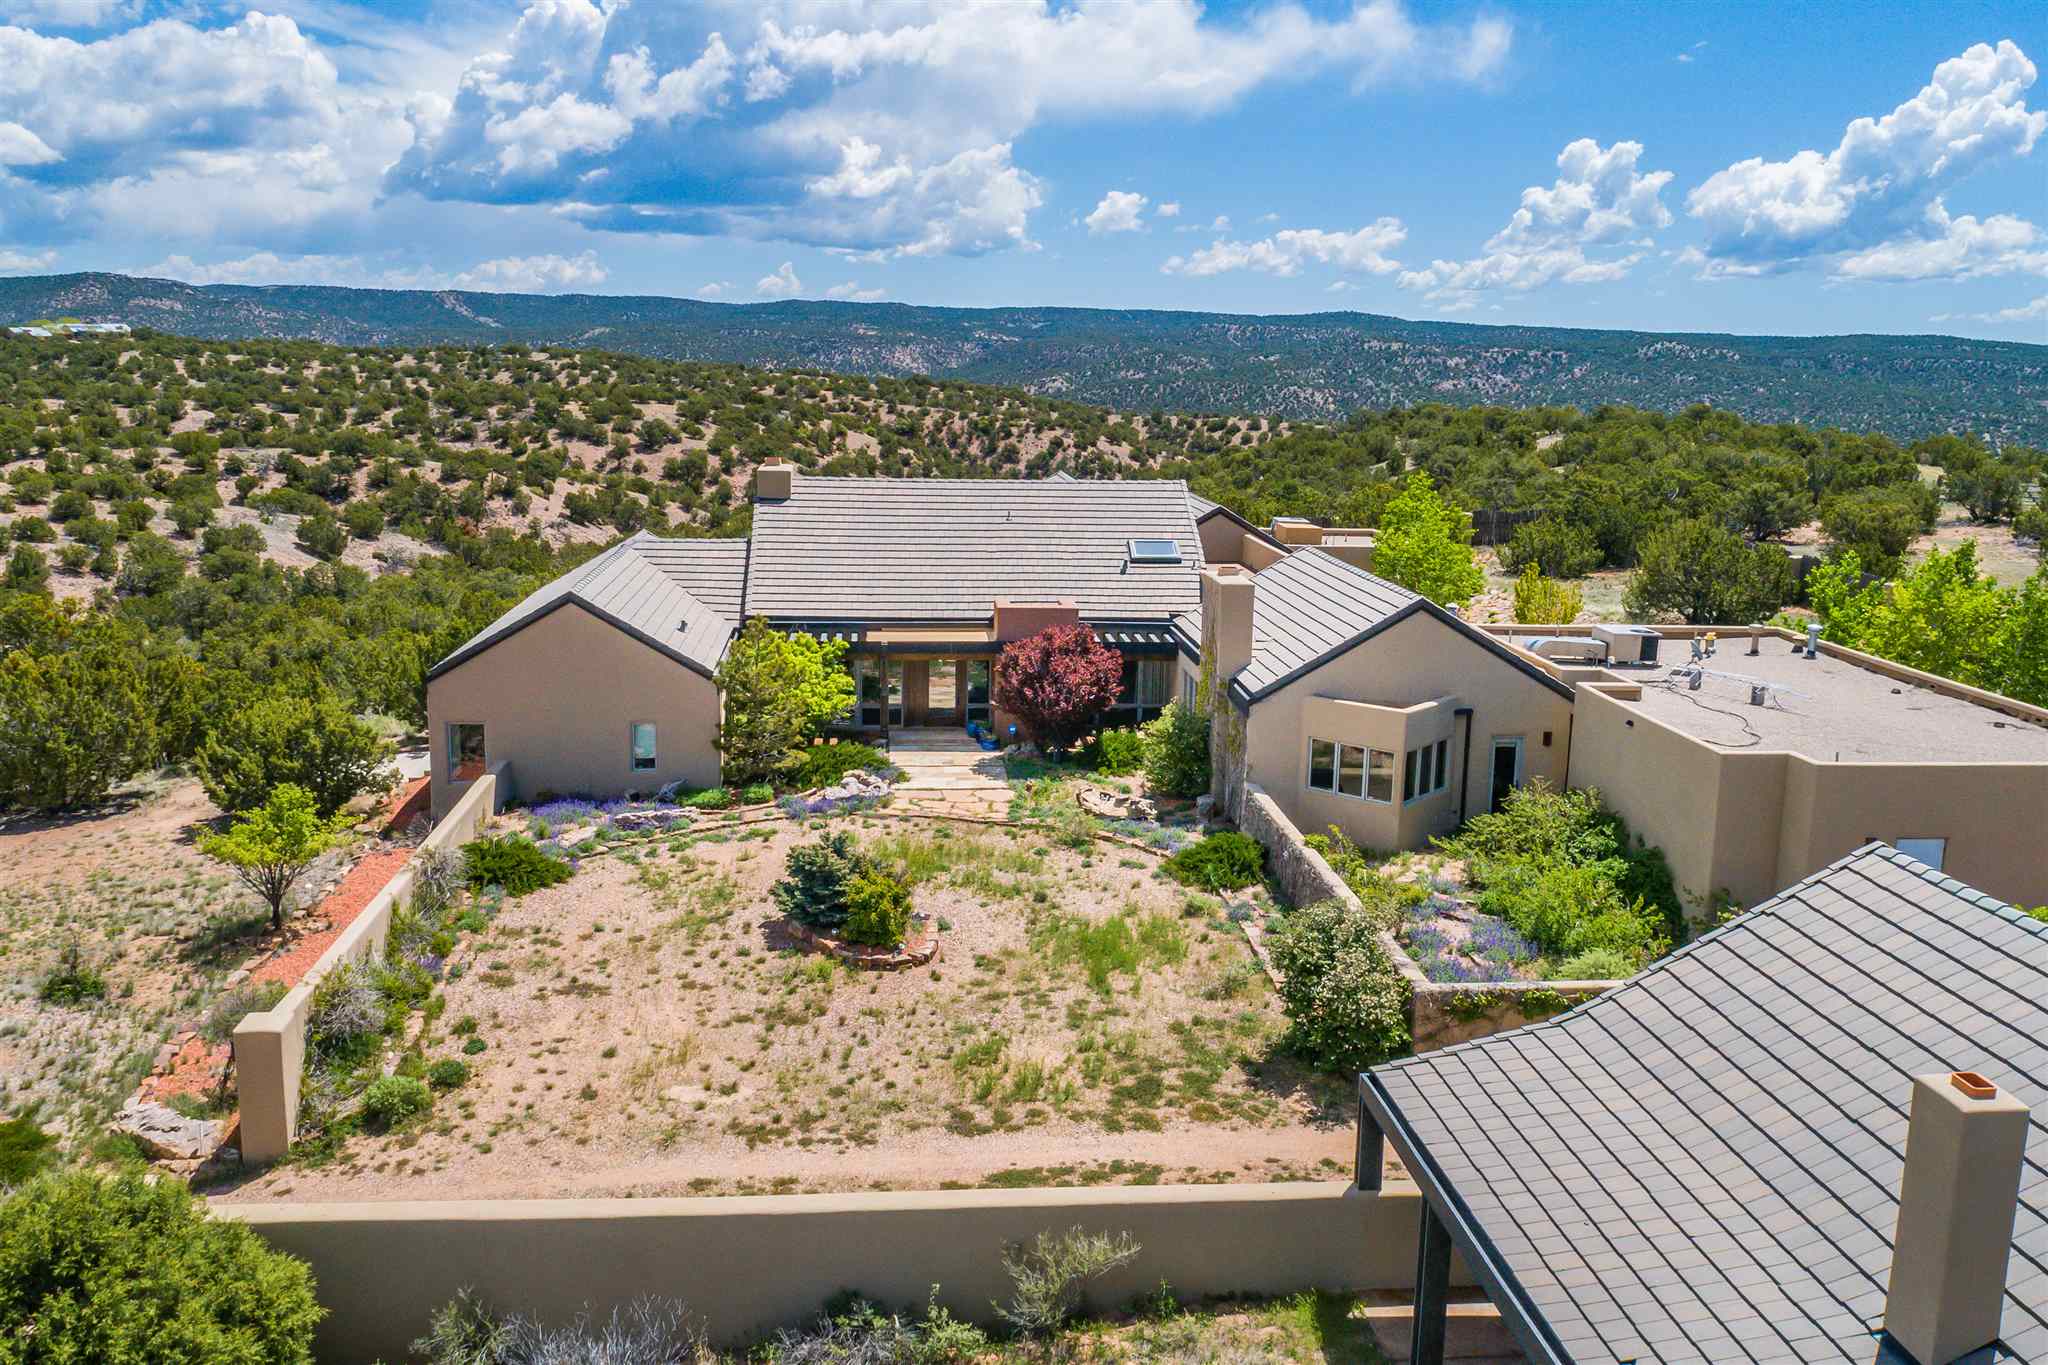 46 & 50 Cattle, Lamy, New Mexico 87540, 5 Bedrooms Bedrooms, ,7 BathroomsBathrooms,Residential,For Sale,46 & 50 Cattle,201902026